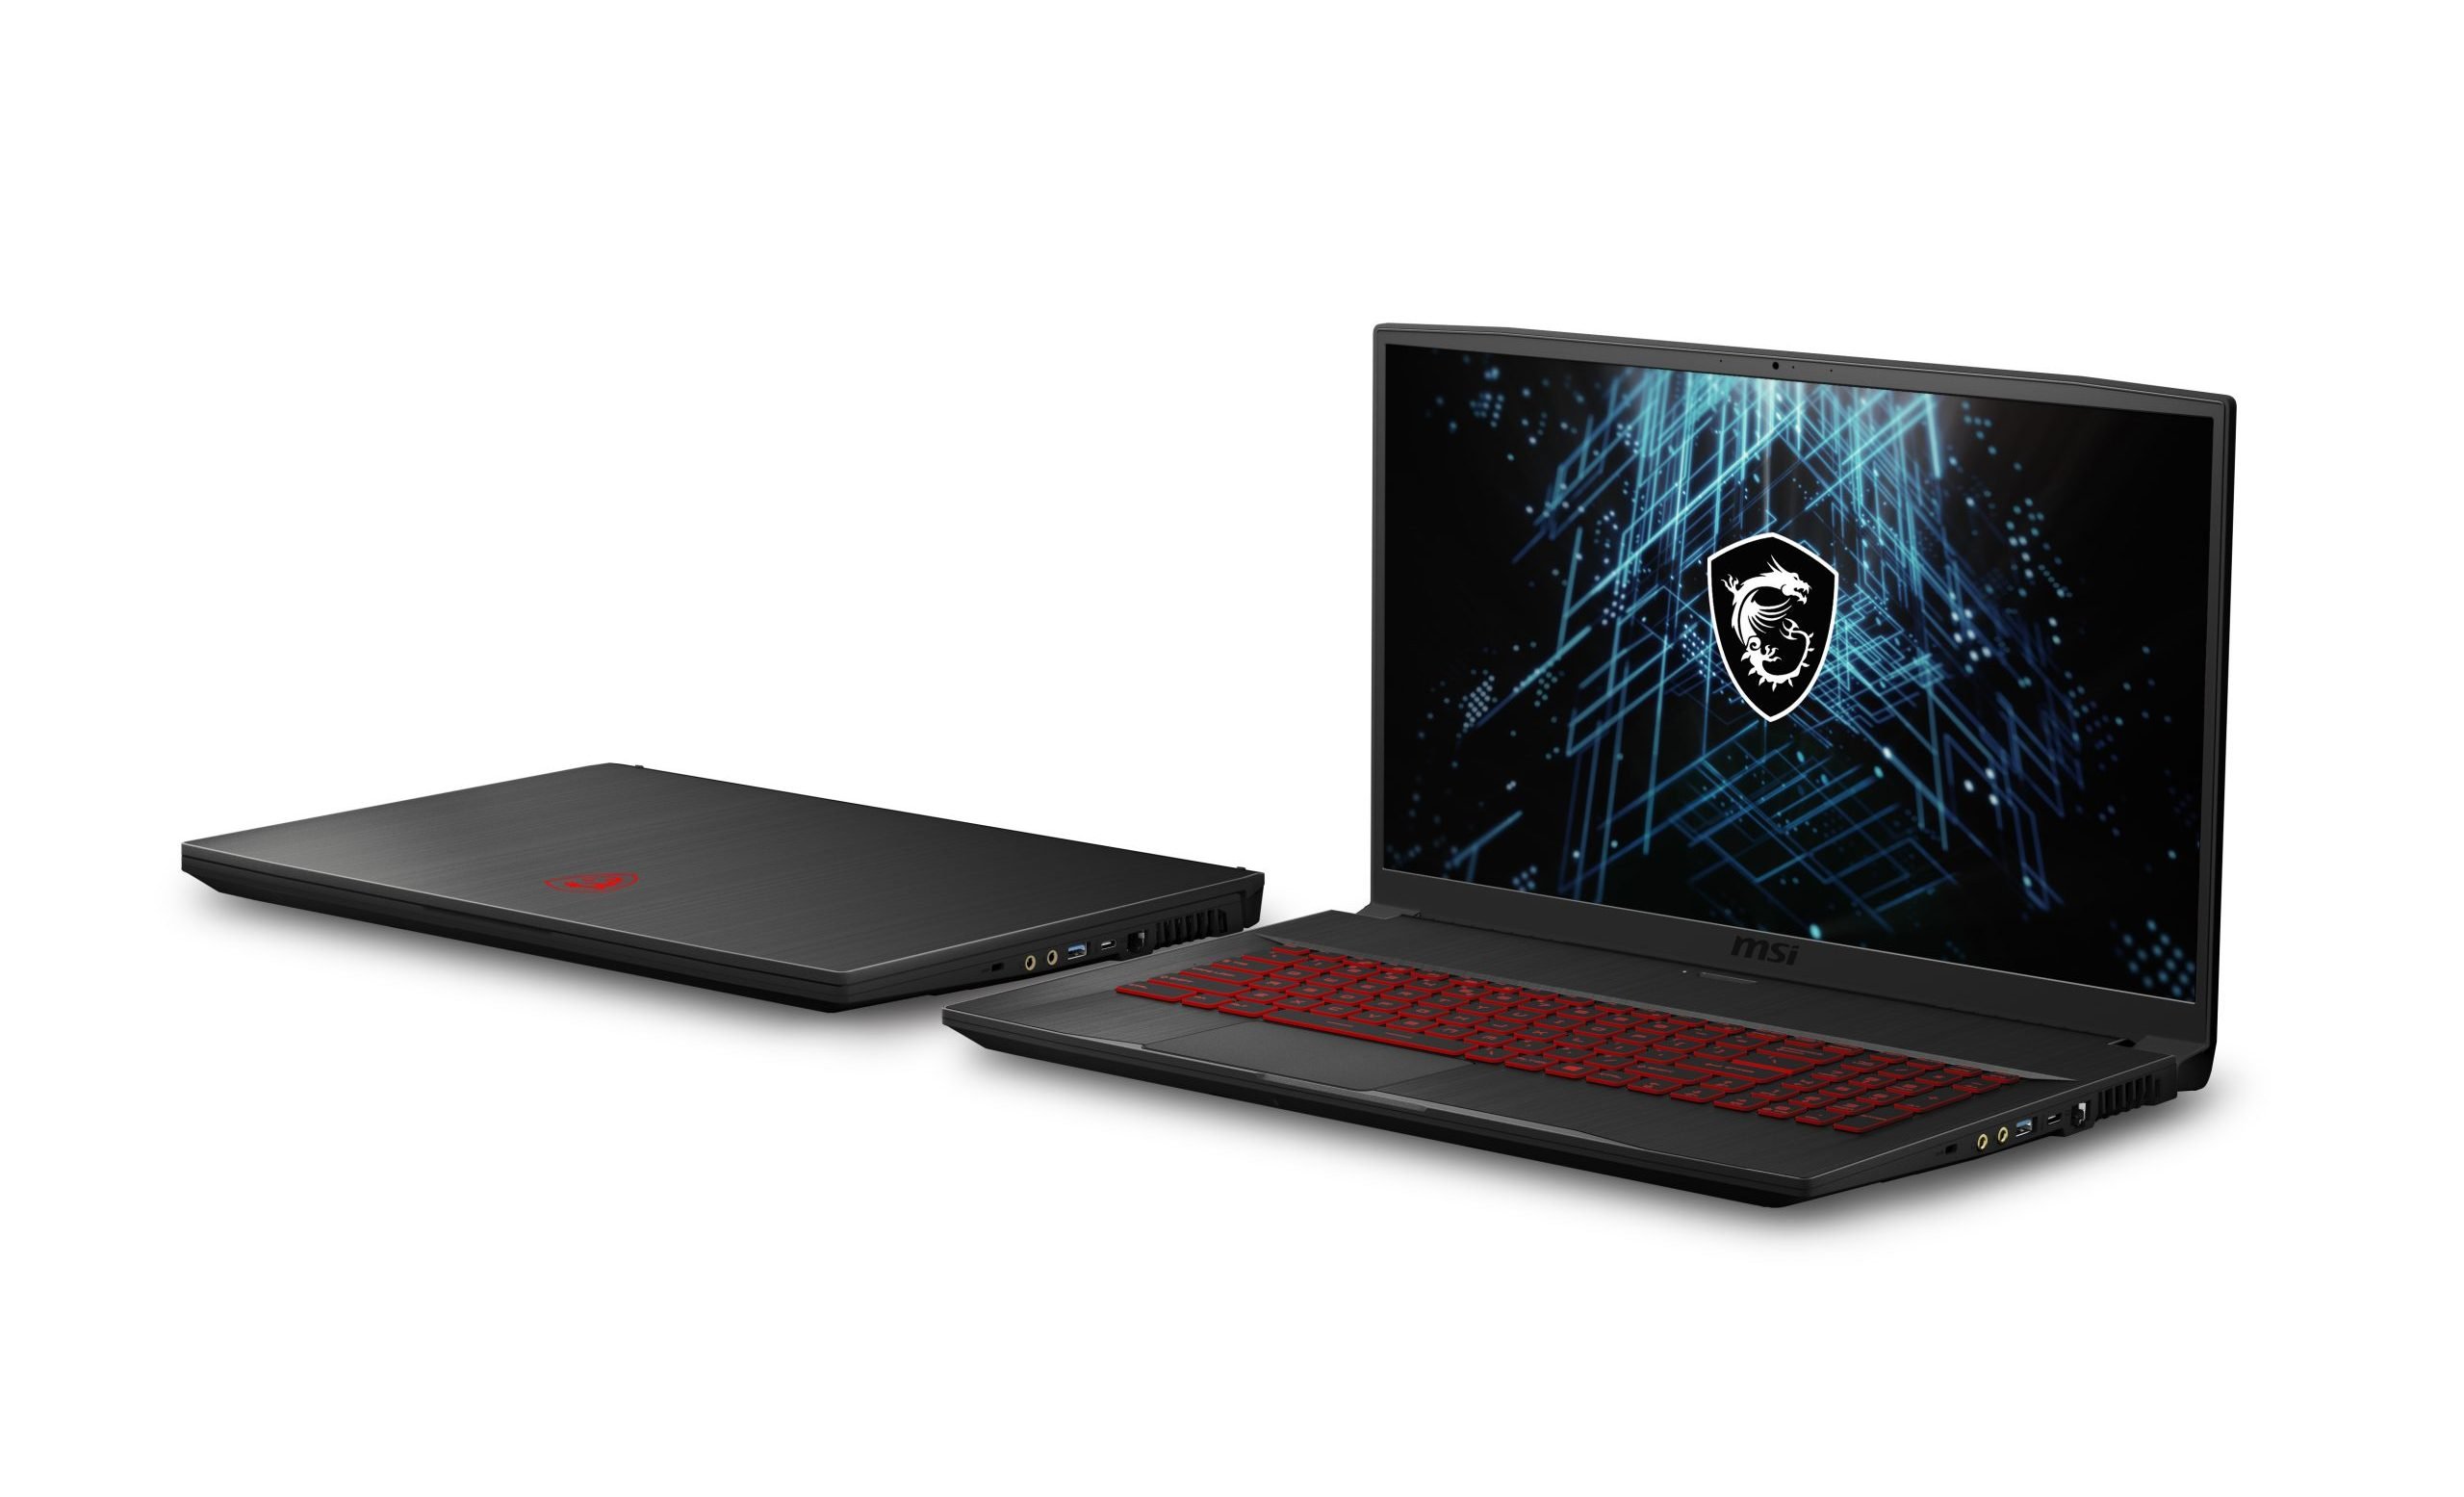 MSI NB GF75 Thin photo 05 scaled e1610580552323 CES 2021: MSI Roars In With Dragon Spirit In New Laptop Range